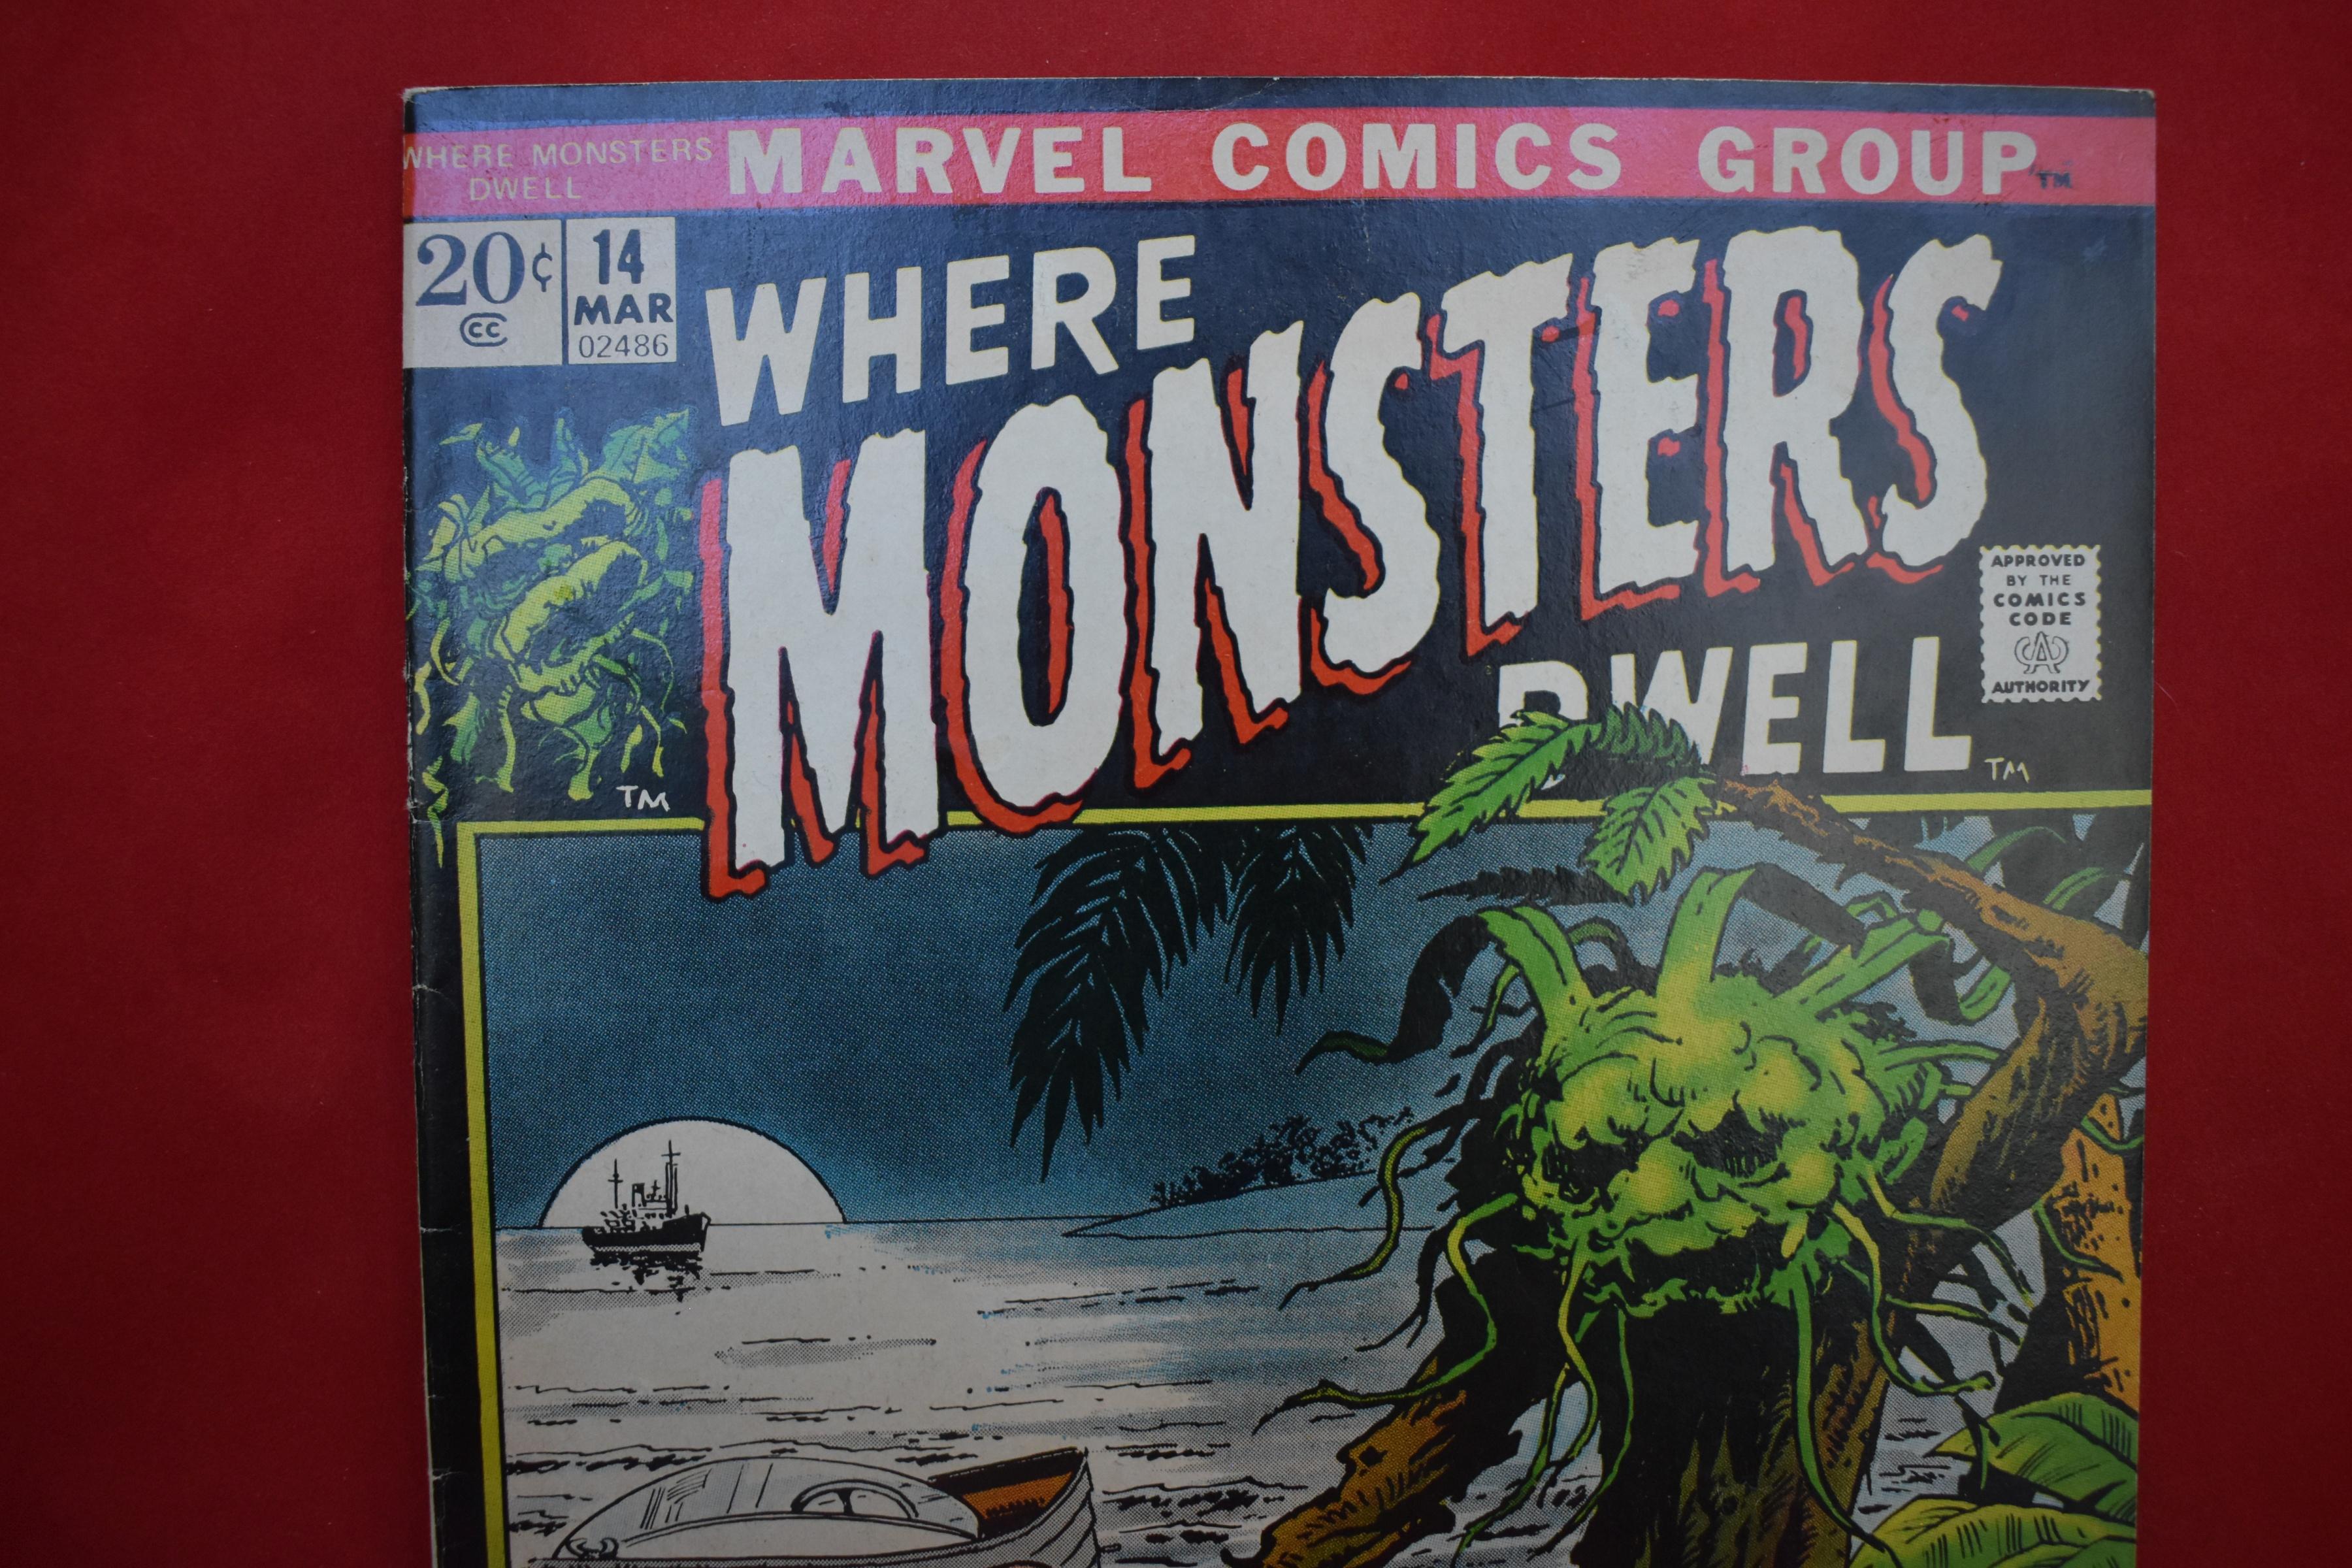 WHERE MONSTERS DWELL #14 | THE GREEN THING! | JOHN SEVERIN - 1972